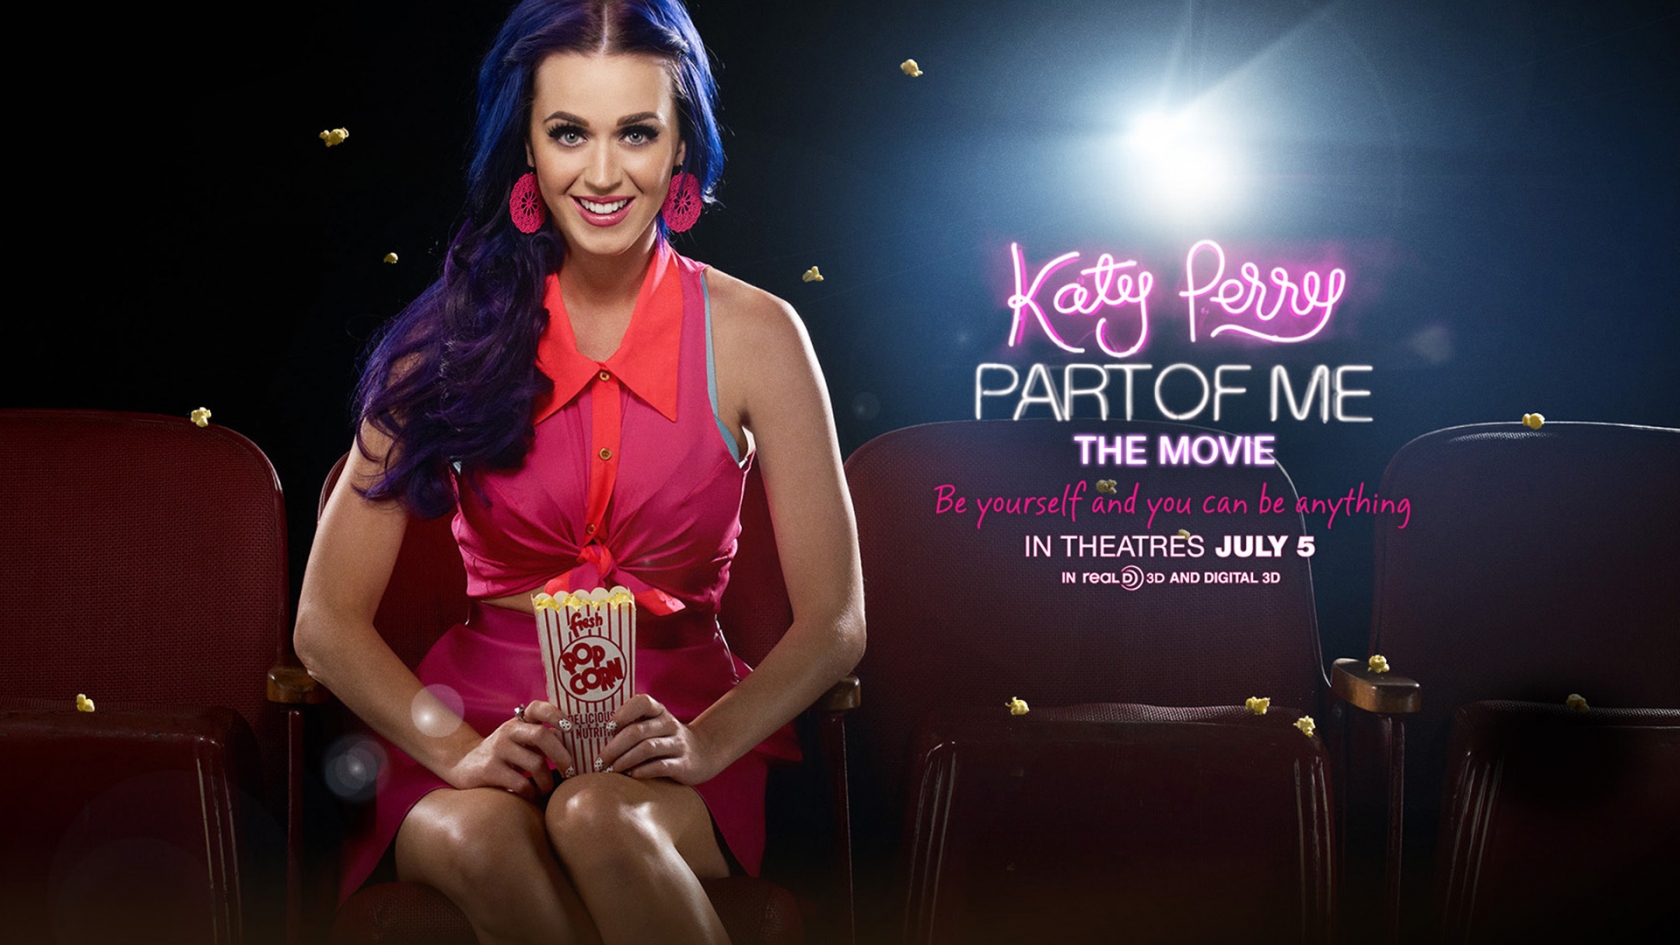 Katy Perry Part Of Me Movie 2012 for 1680 x 945 HDTV resolution